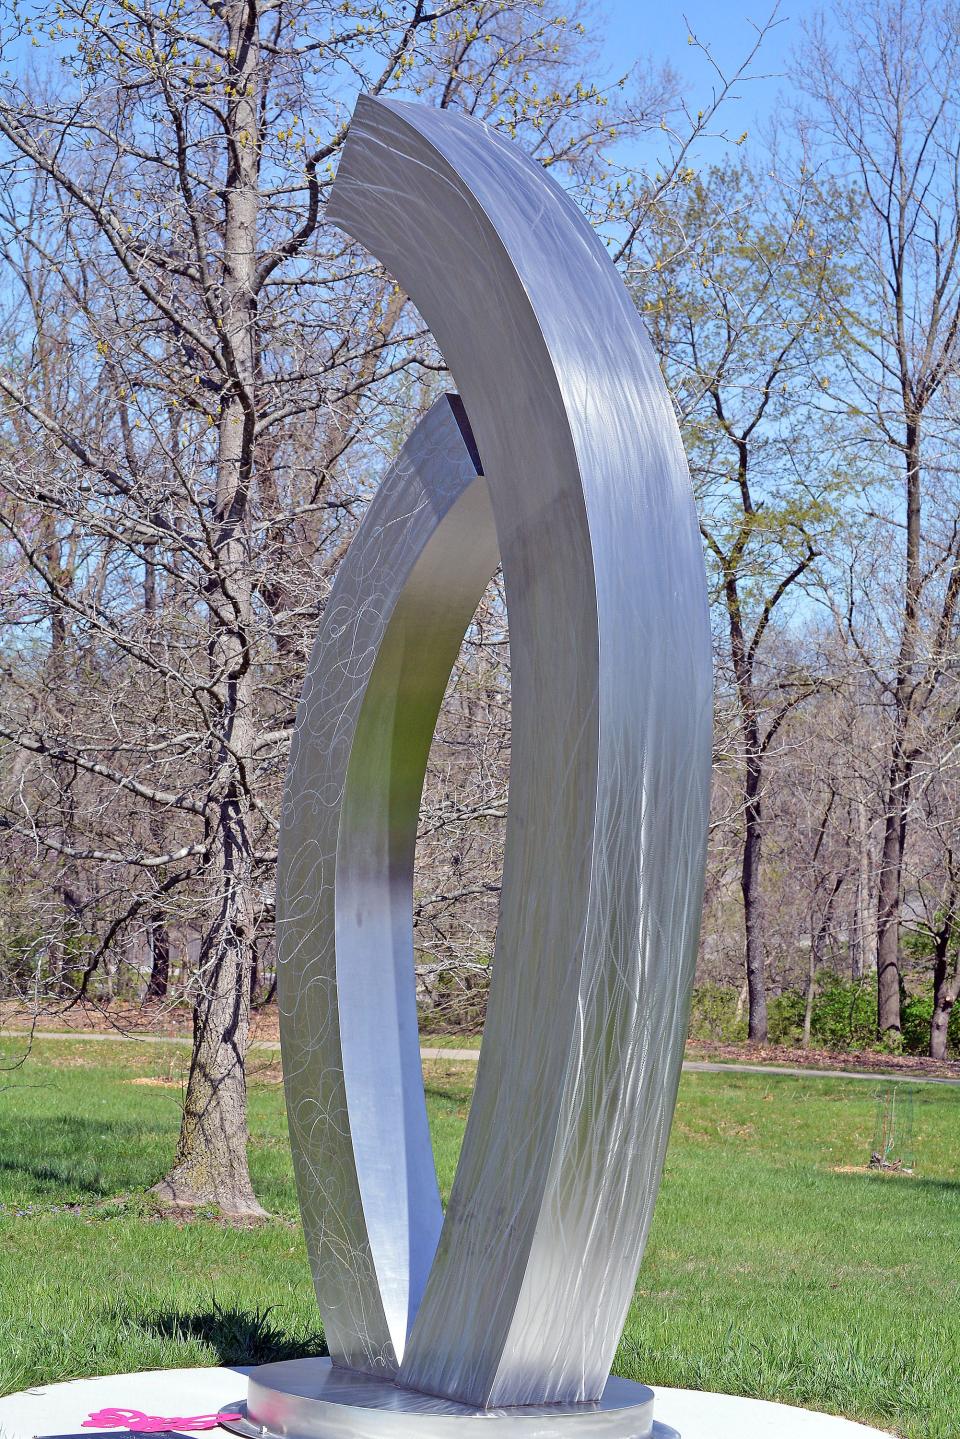 The sculpture 'Be' by artist Ben Pierce as seen in the Children's Grove Sculpture Garden on Monday at Stephens Lake Park. It is the first of upward seven sculptures sought for the portion of the park east of the Reichmann Indoor Pavilion.